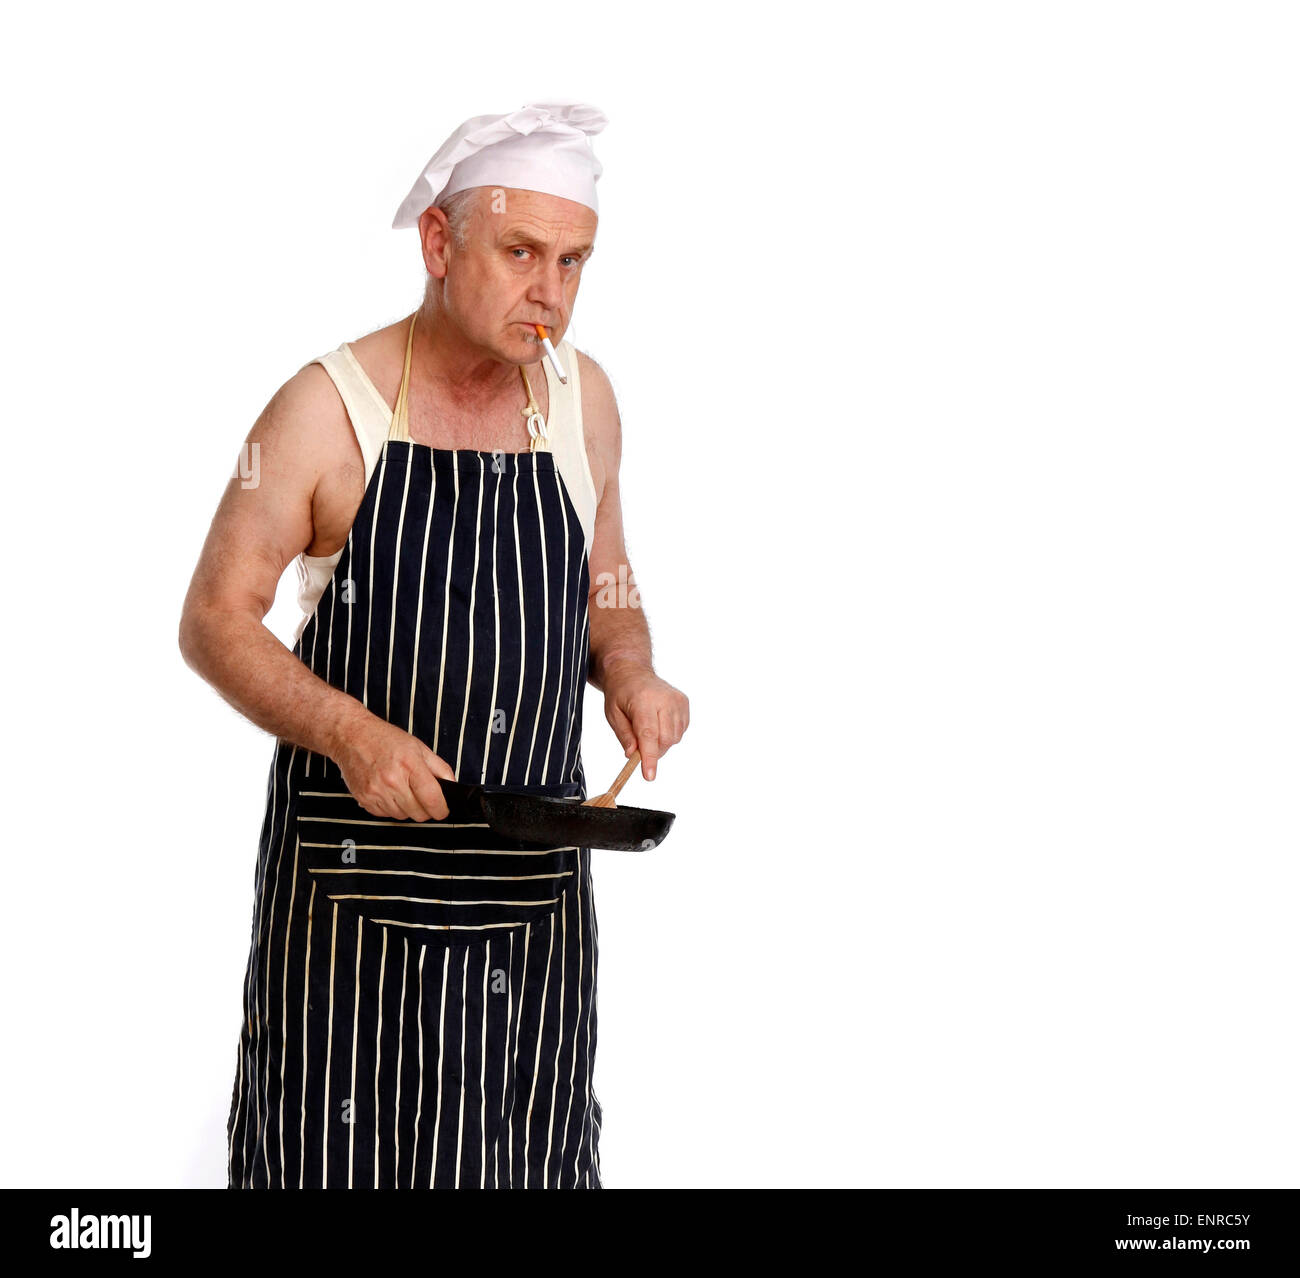 Man as a low grade chef or cook in a greasy spoon Cafe, smoking while he cooks. Stock Photo